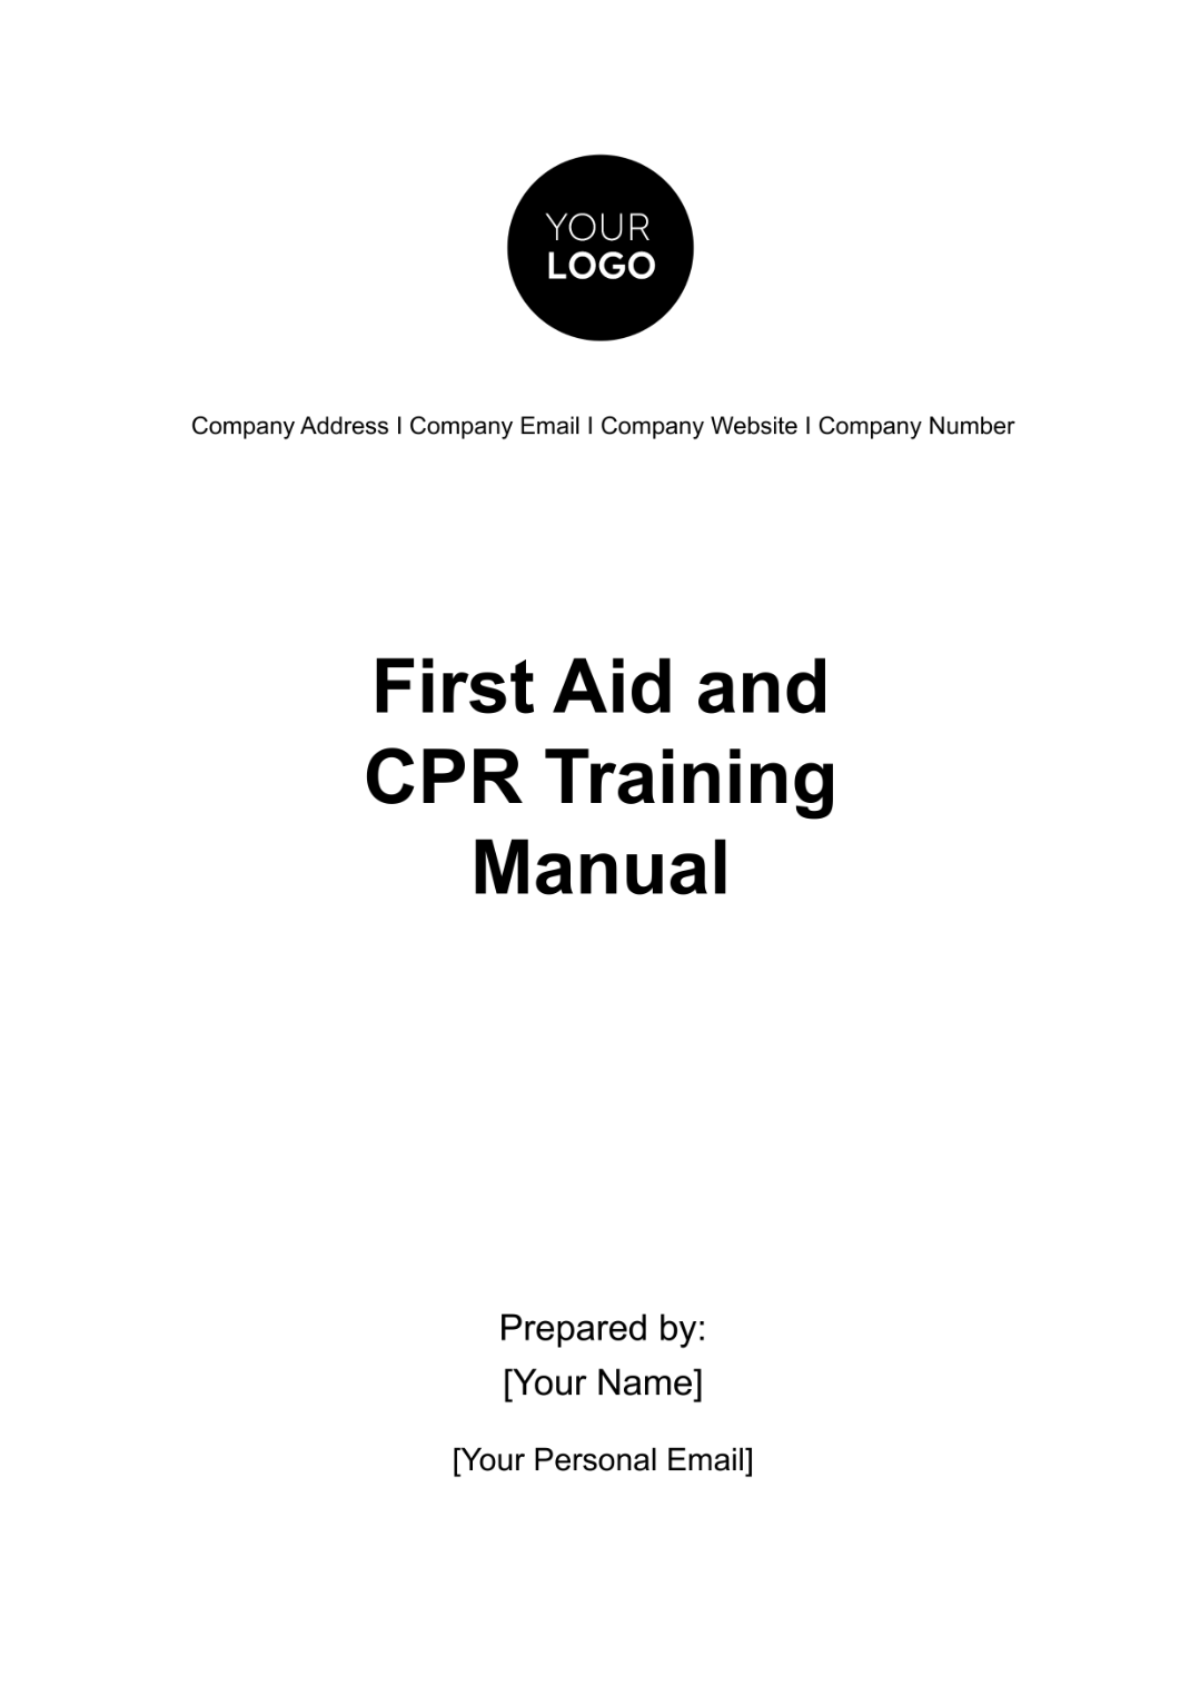 Free First Aid and CPR Training Manual HR Template